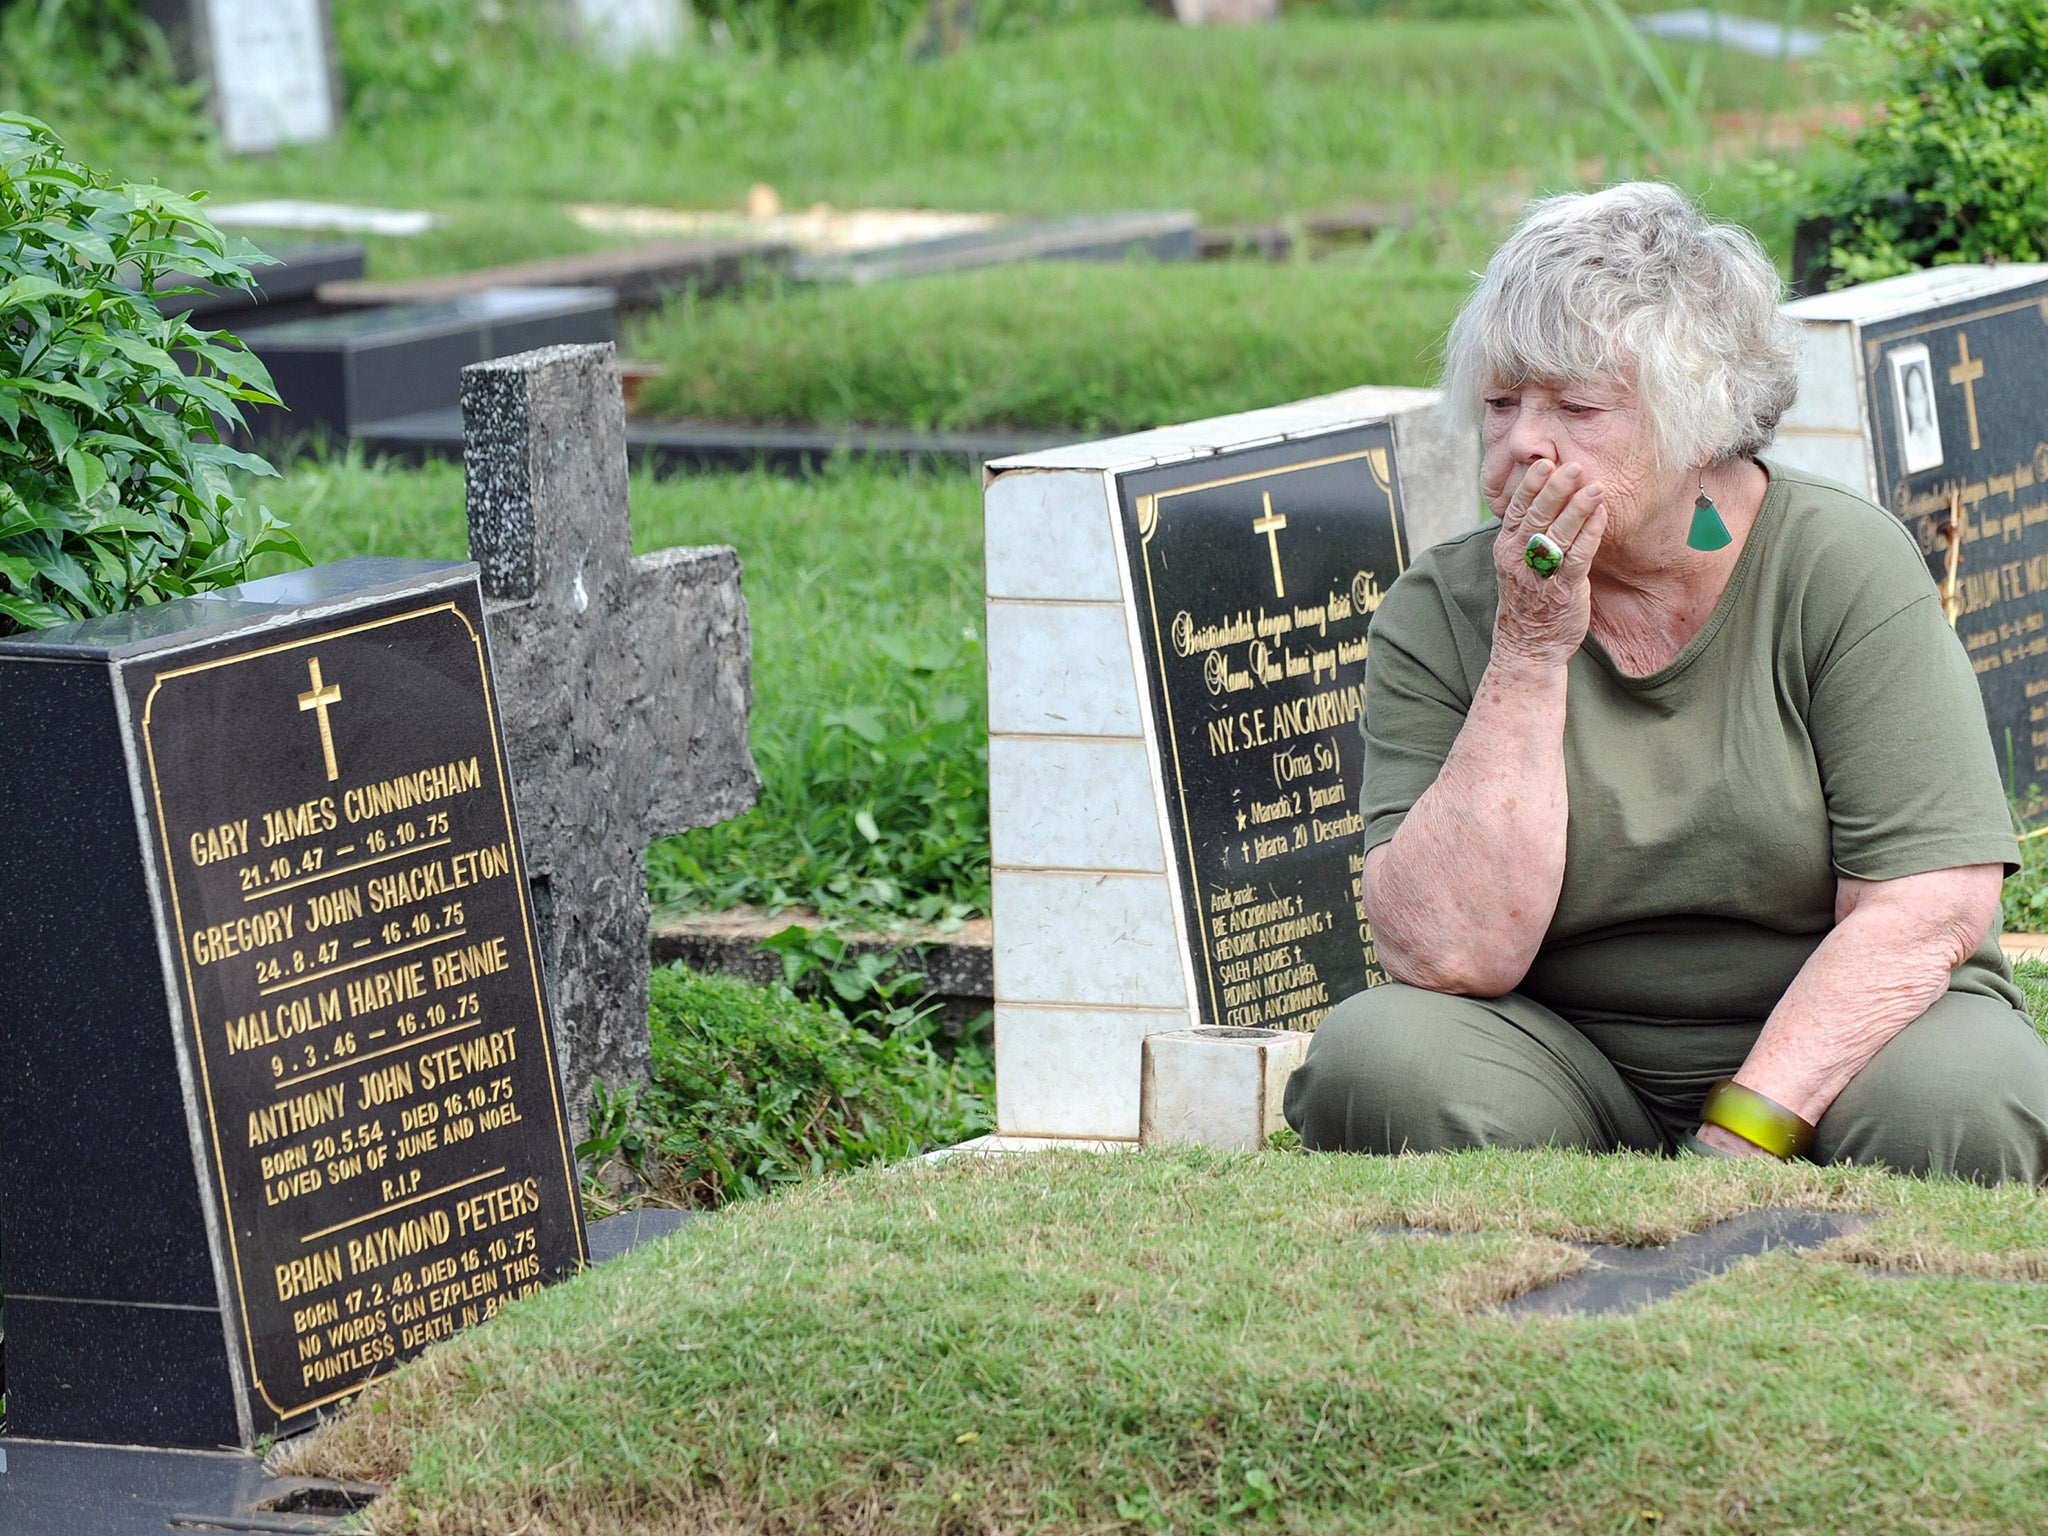 Shirley Shackleton, wife of late journalist Gregory Shackleton, sits next to the grave of the 'Balibo Five' in Jakarta, in 2010